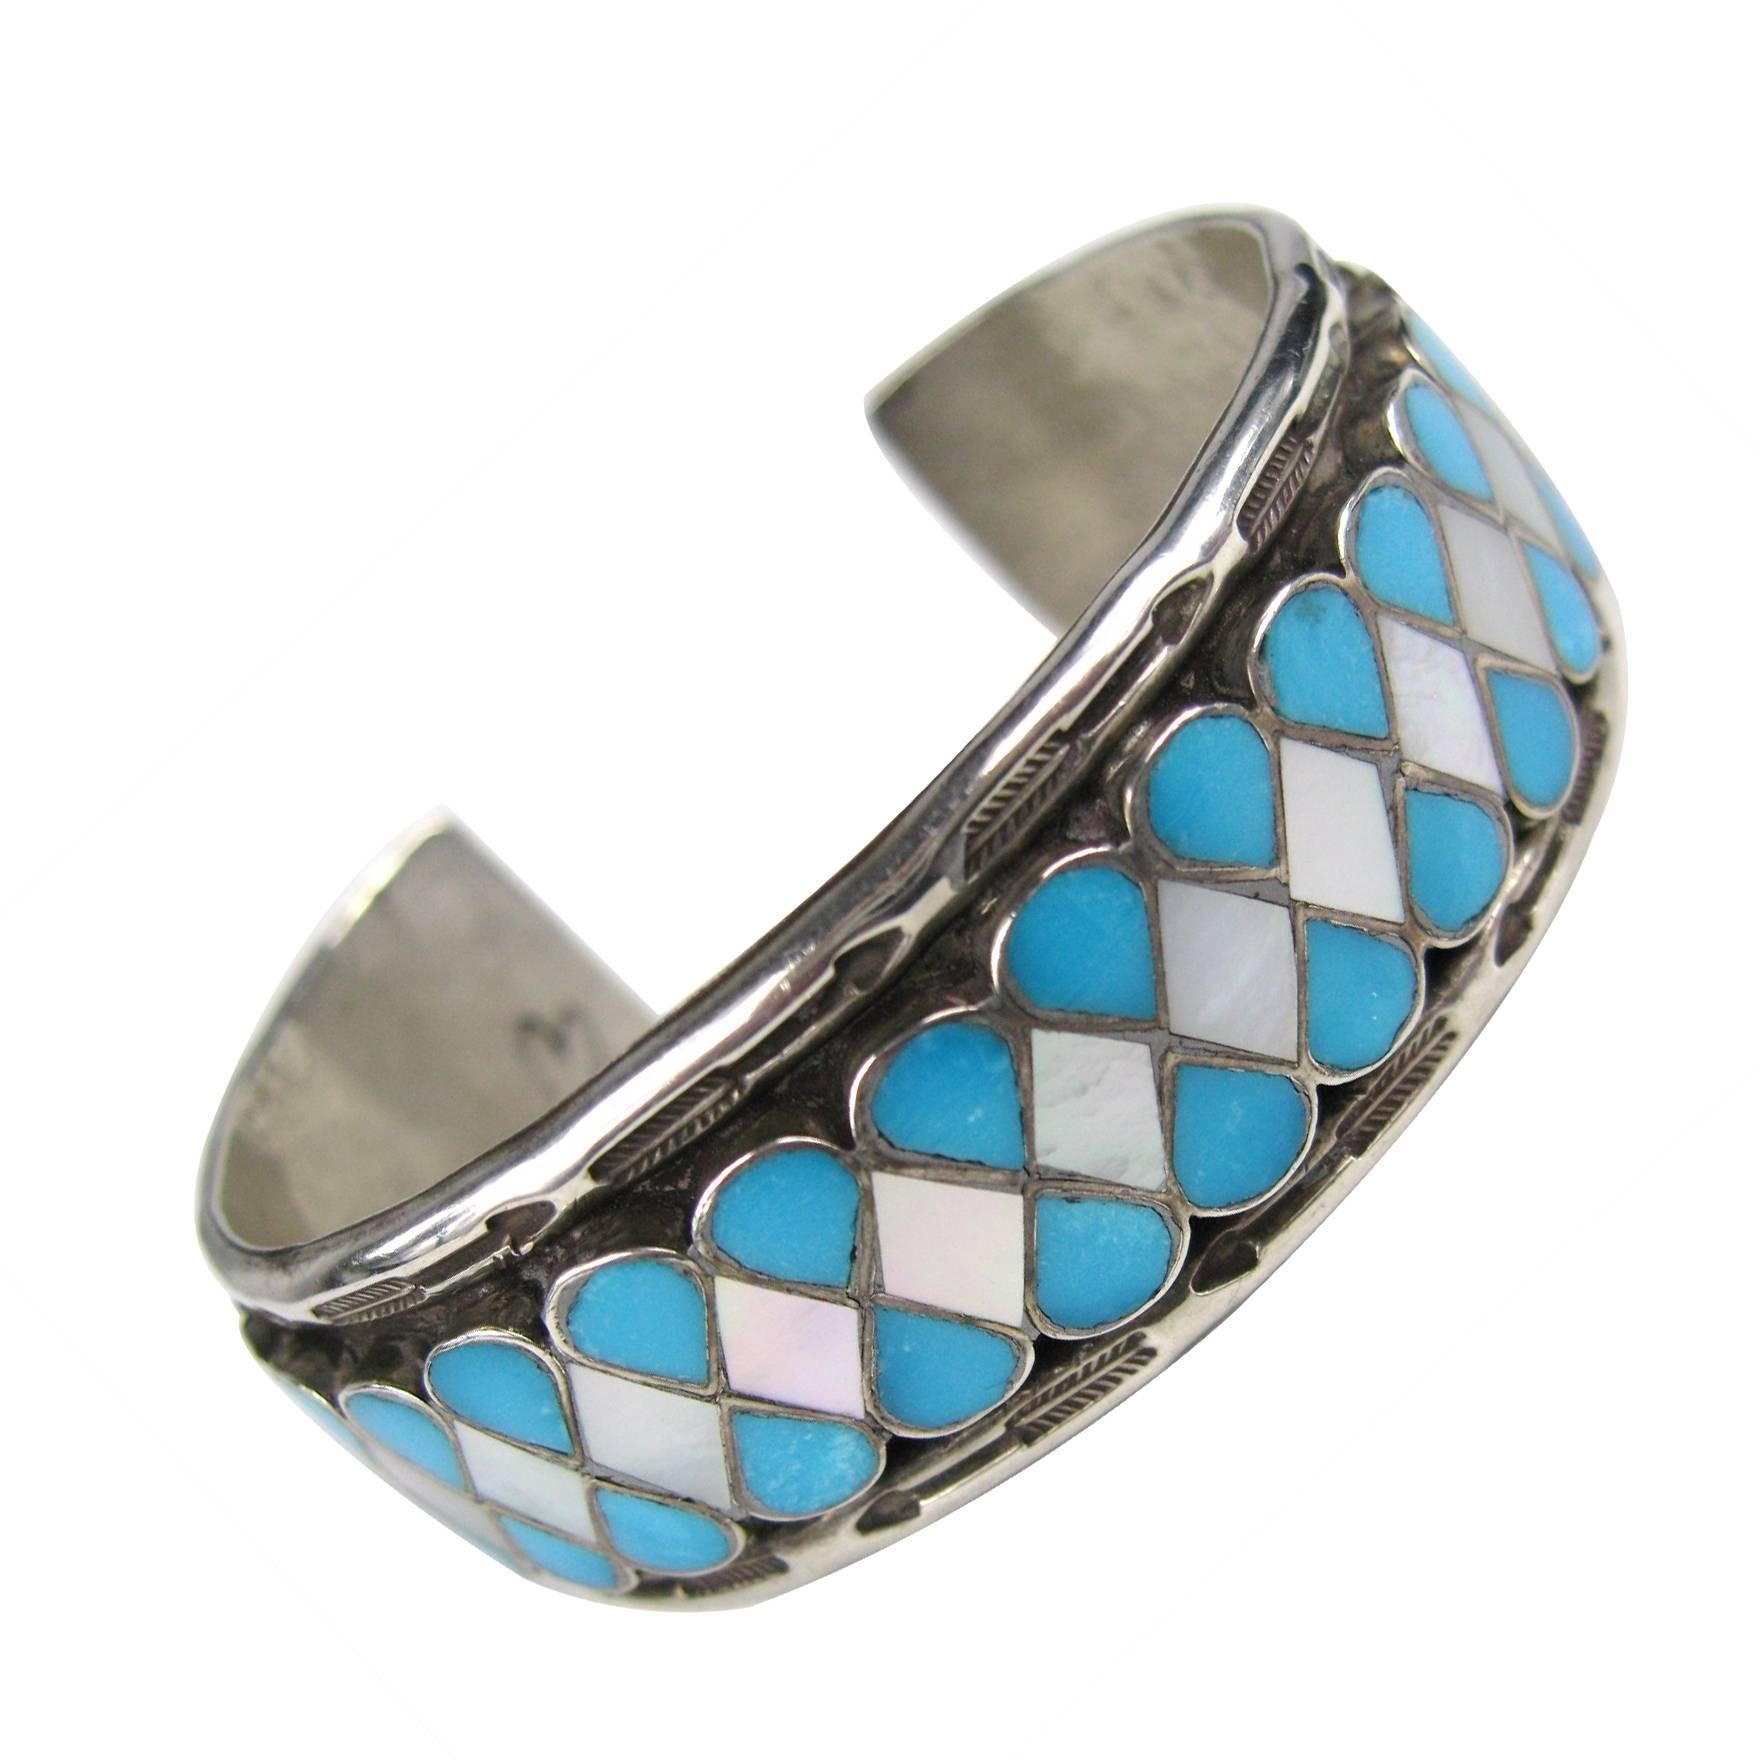 Tumbled Sterling Zuni Cuff bracelet Teardrop Inlaid Turquoise For Sale